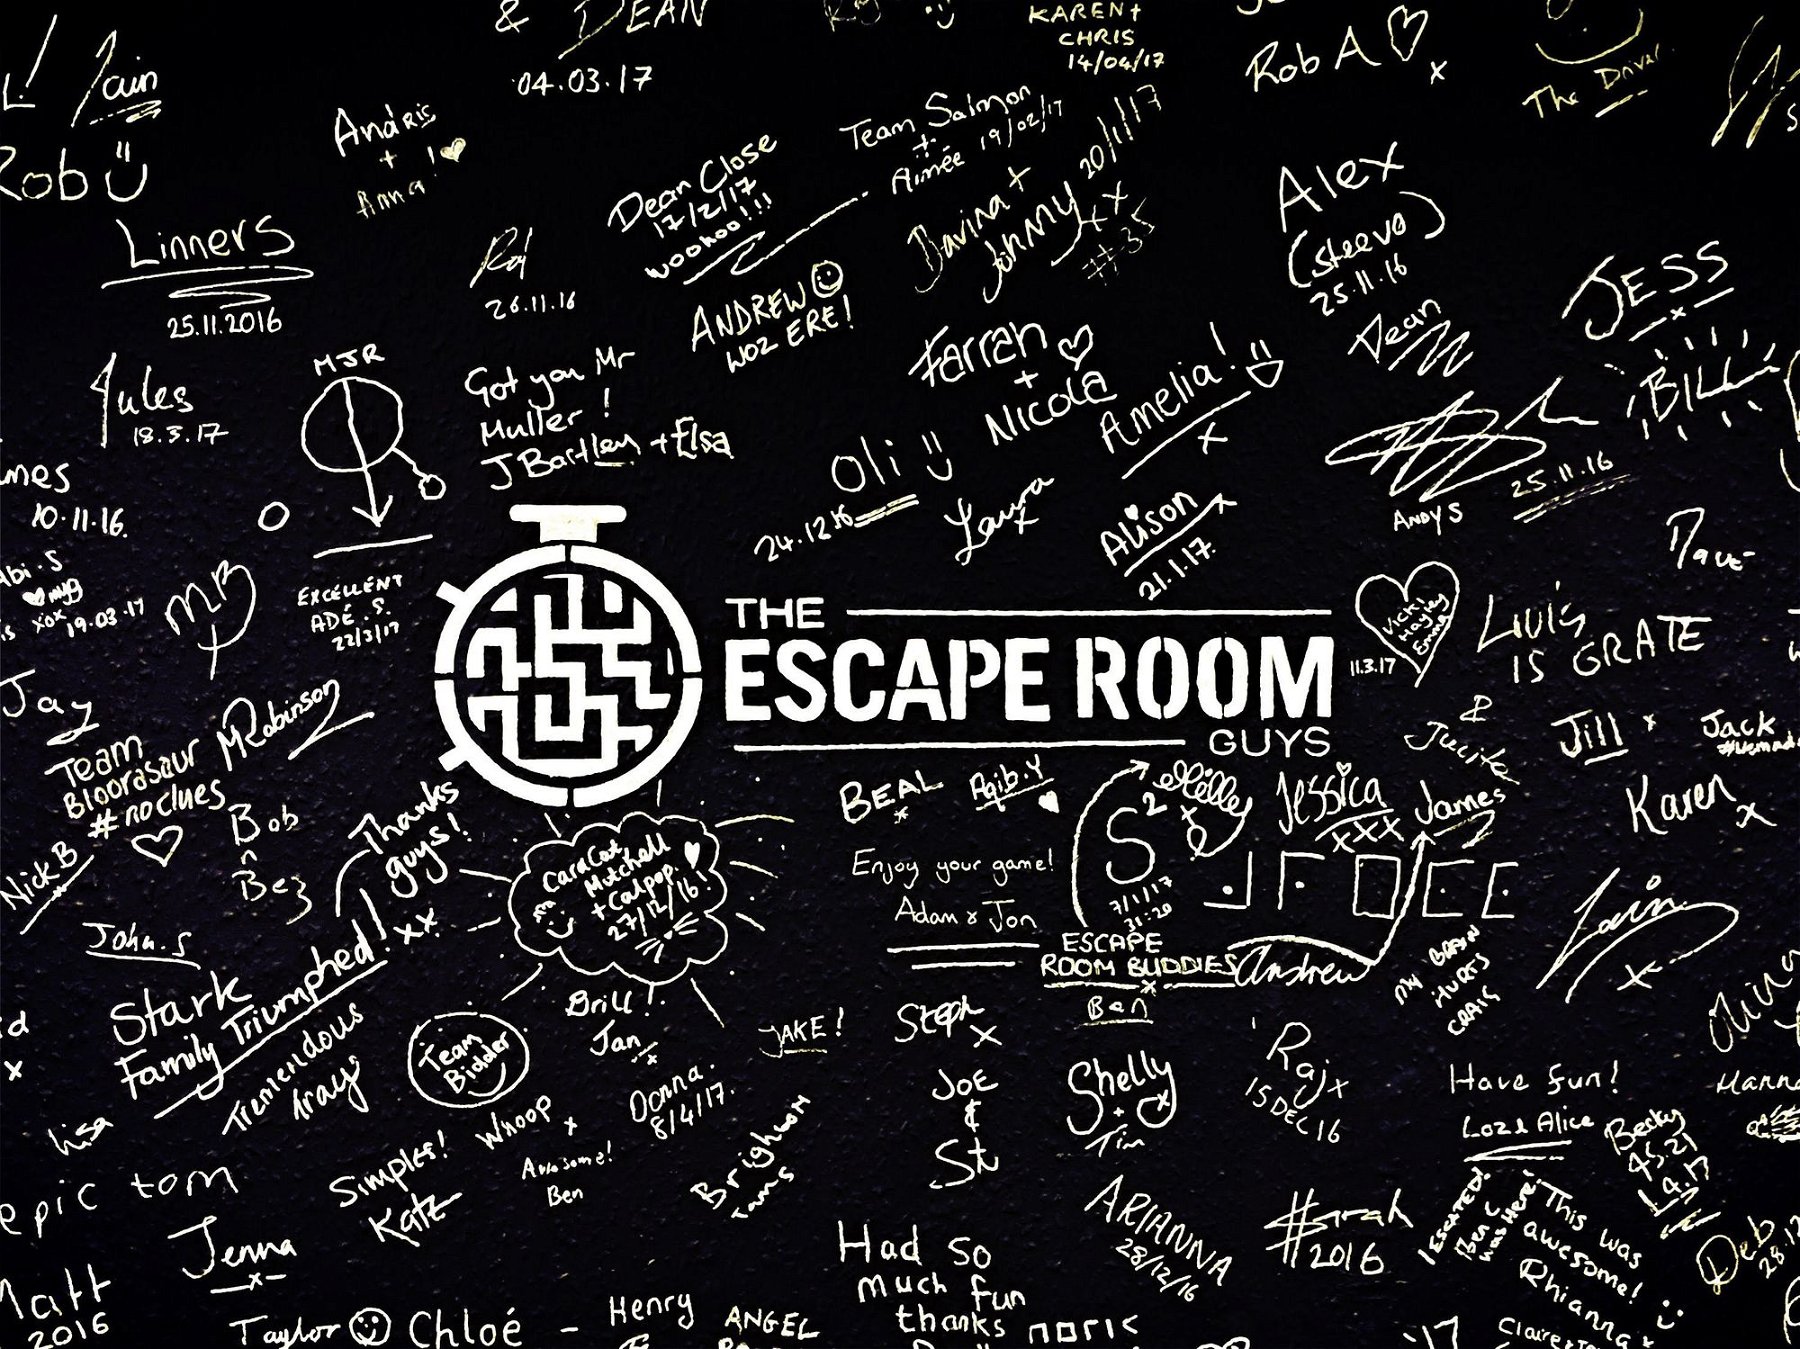 The Escape Room Guys Have Reduced General Admin by 95% With the Help of Beyonk Group’s BookingHound Solution